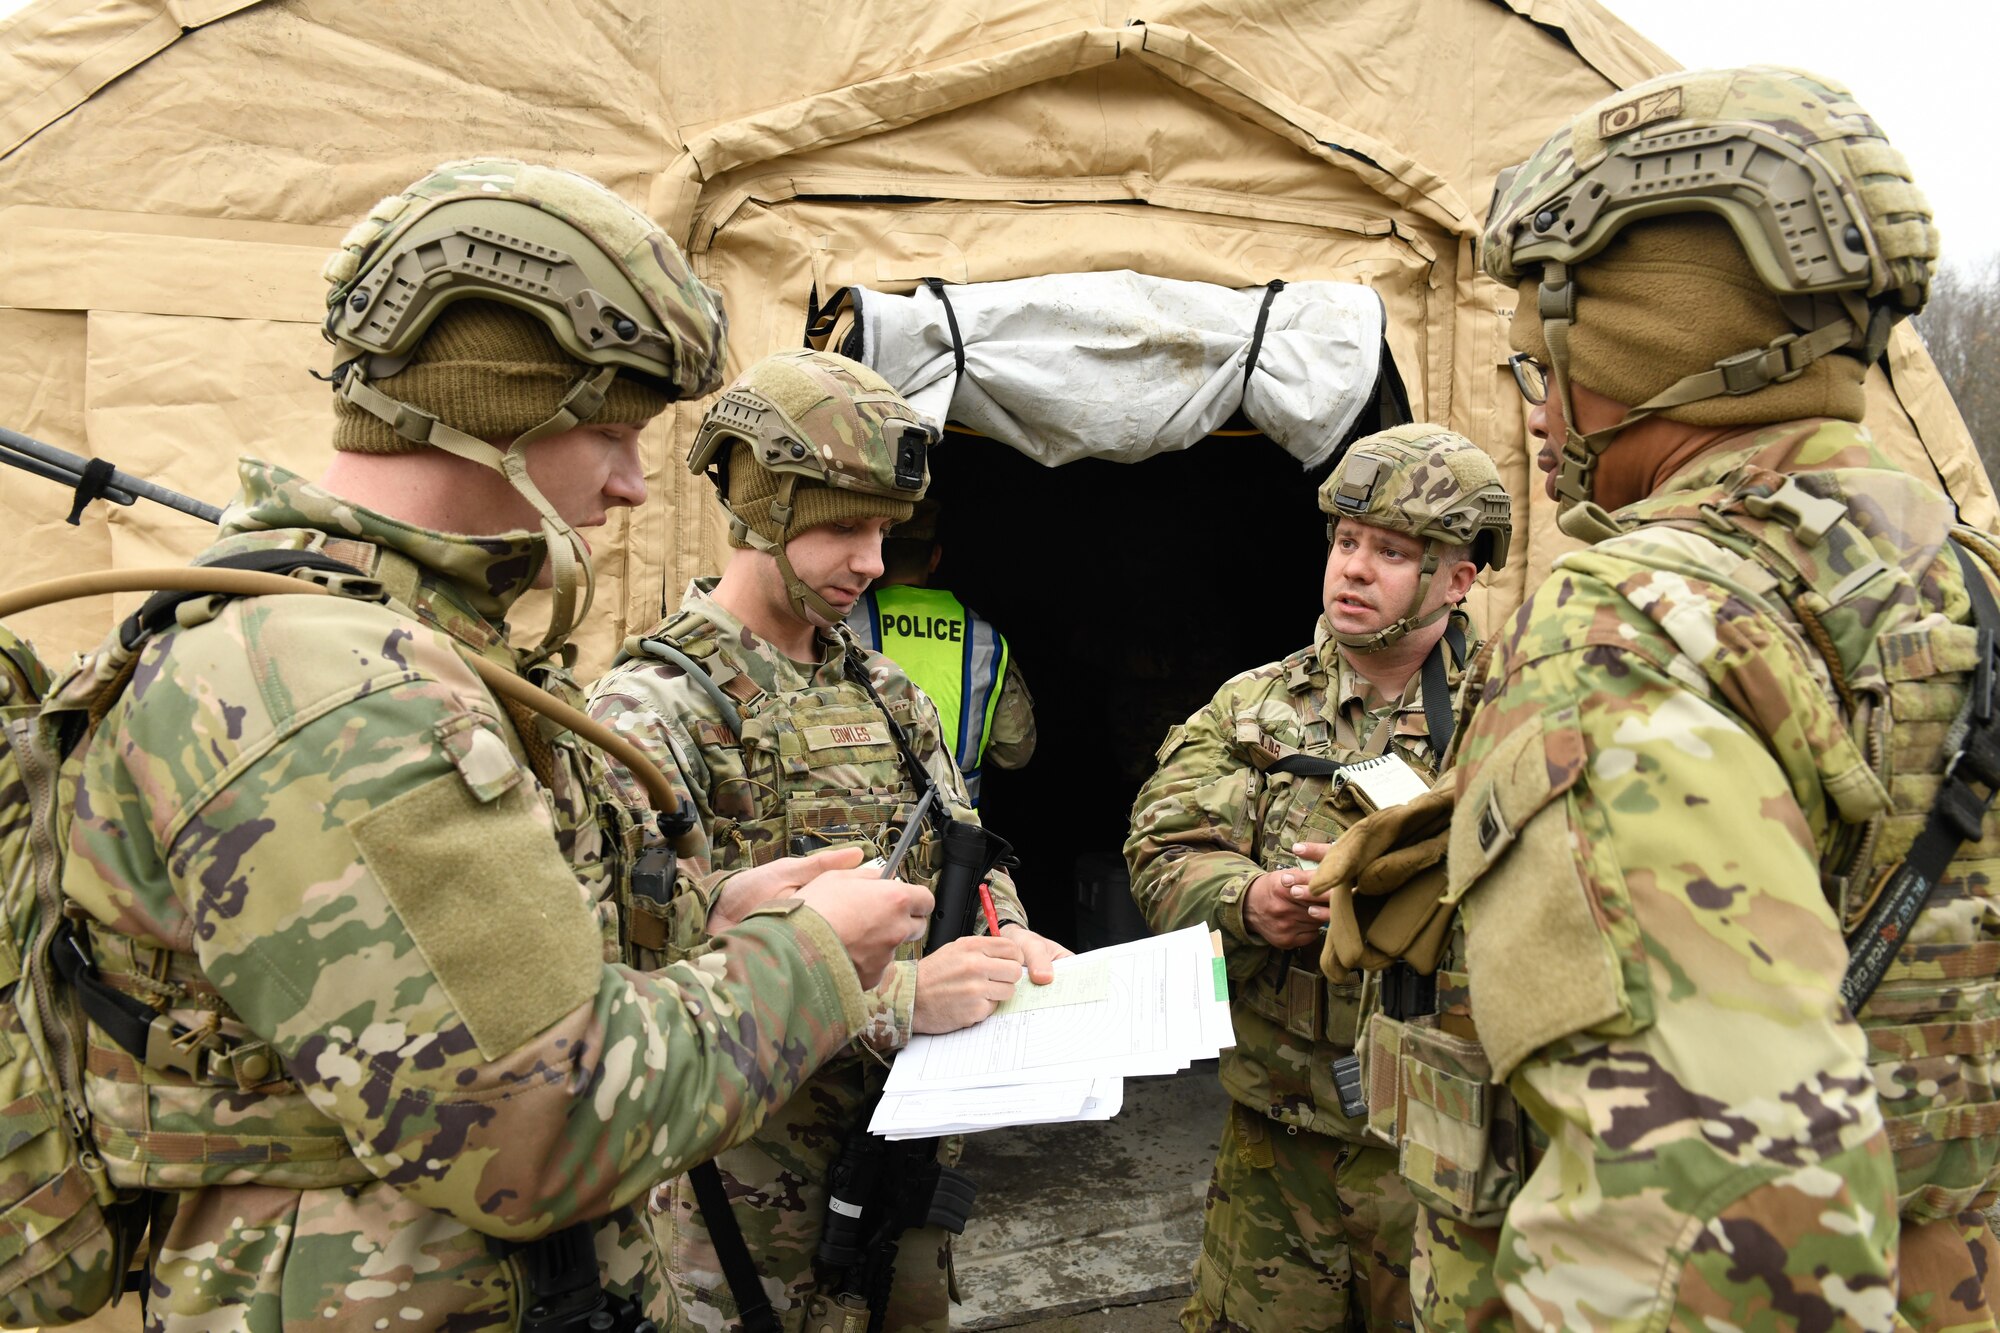 The 910th Civil Engineer Squadron joined the 910th Security Forces Squadron for a 24-hour field exercise in which the units established a bare base and provided perimeter defense, March 31 to April 1, 2022.